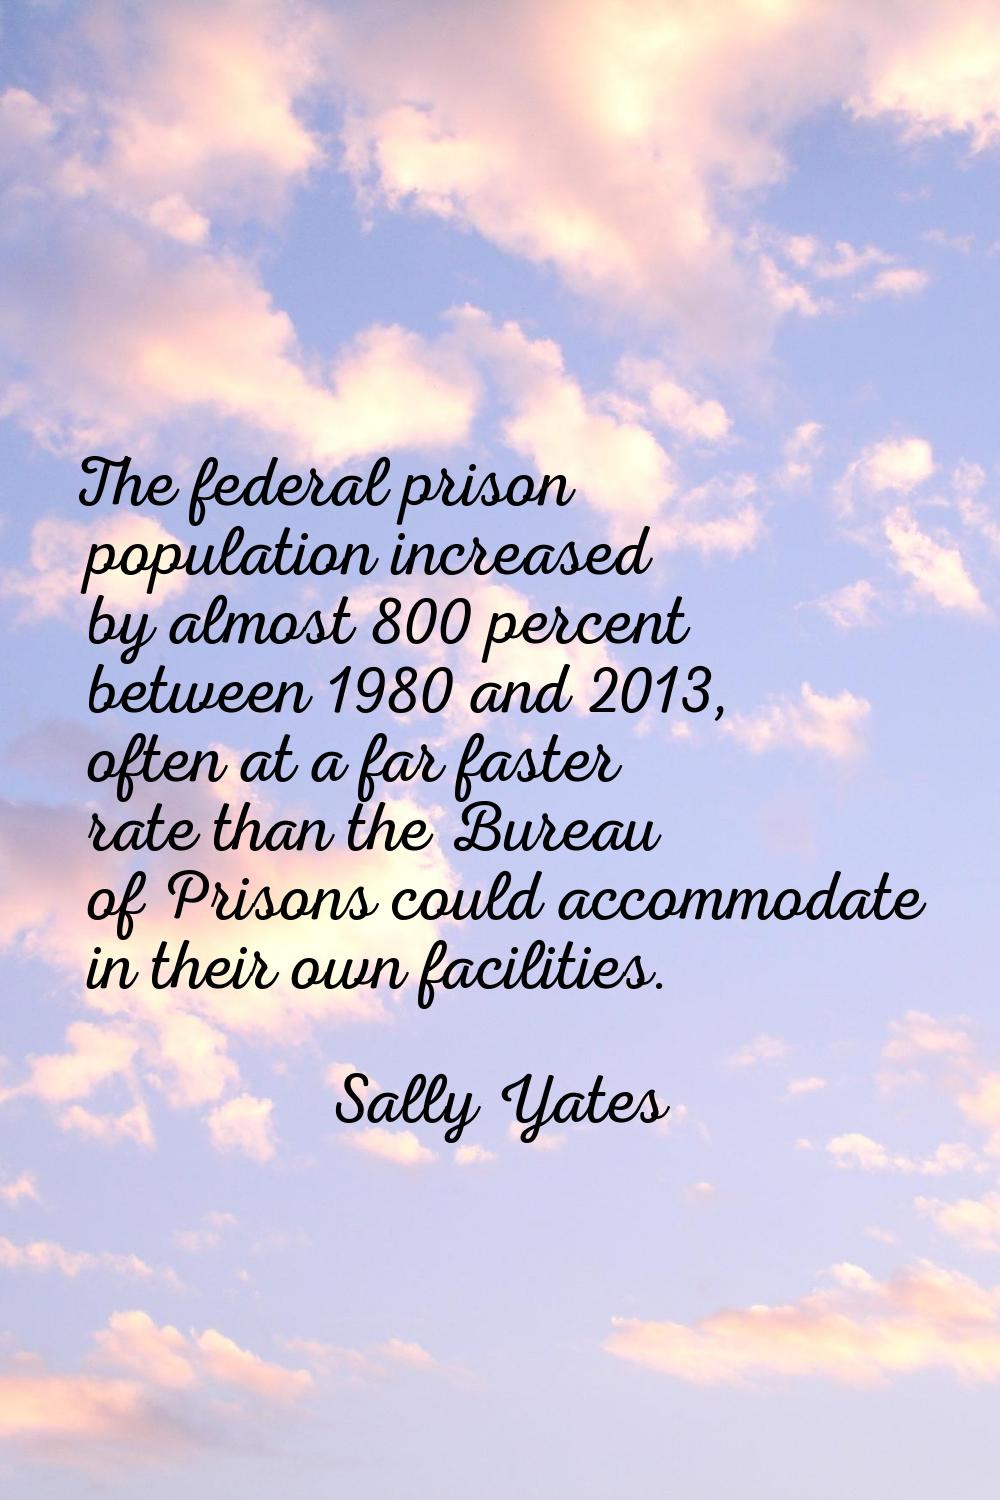 The federal prison population increased by almost 800 percent between 1980 and 2013, often at a far